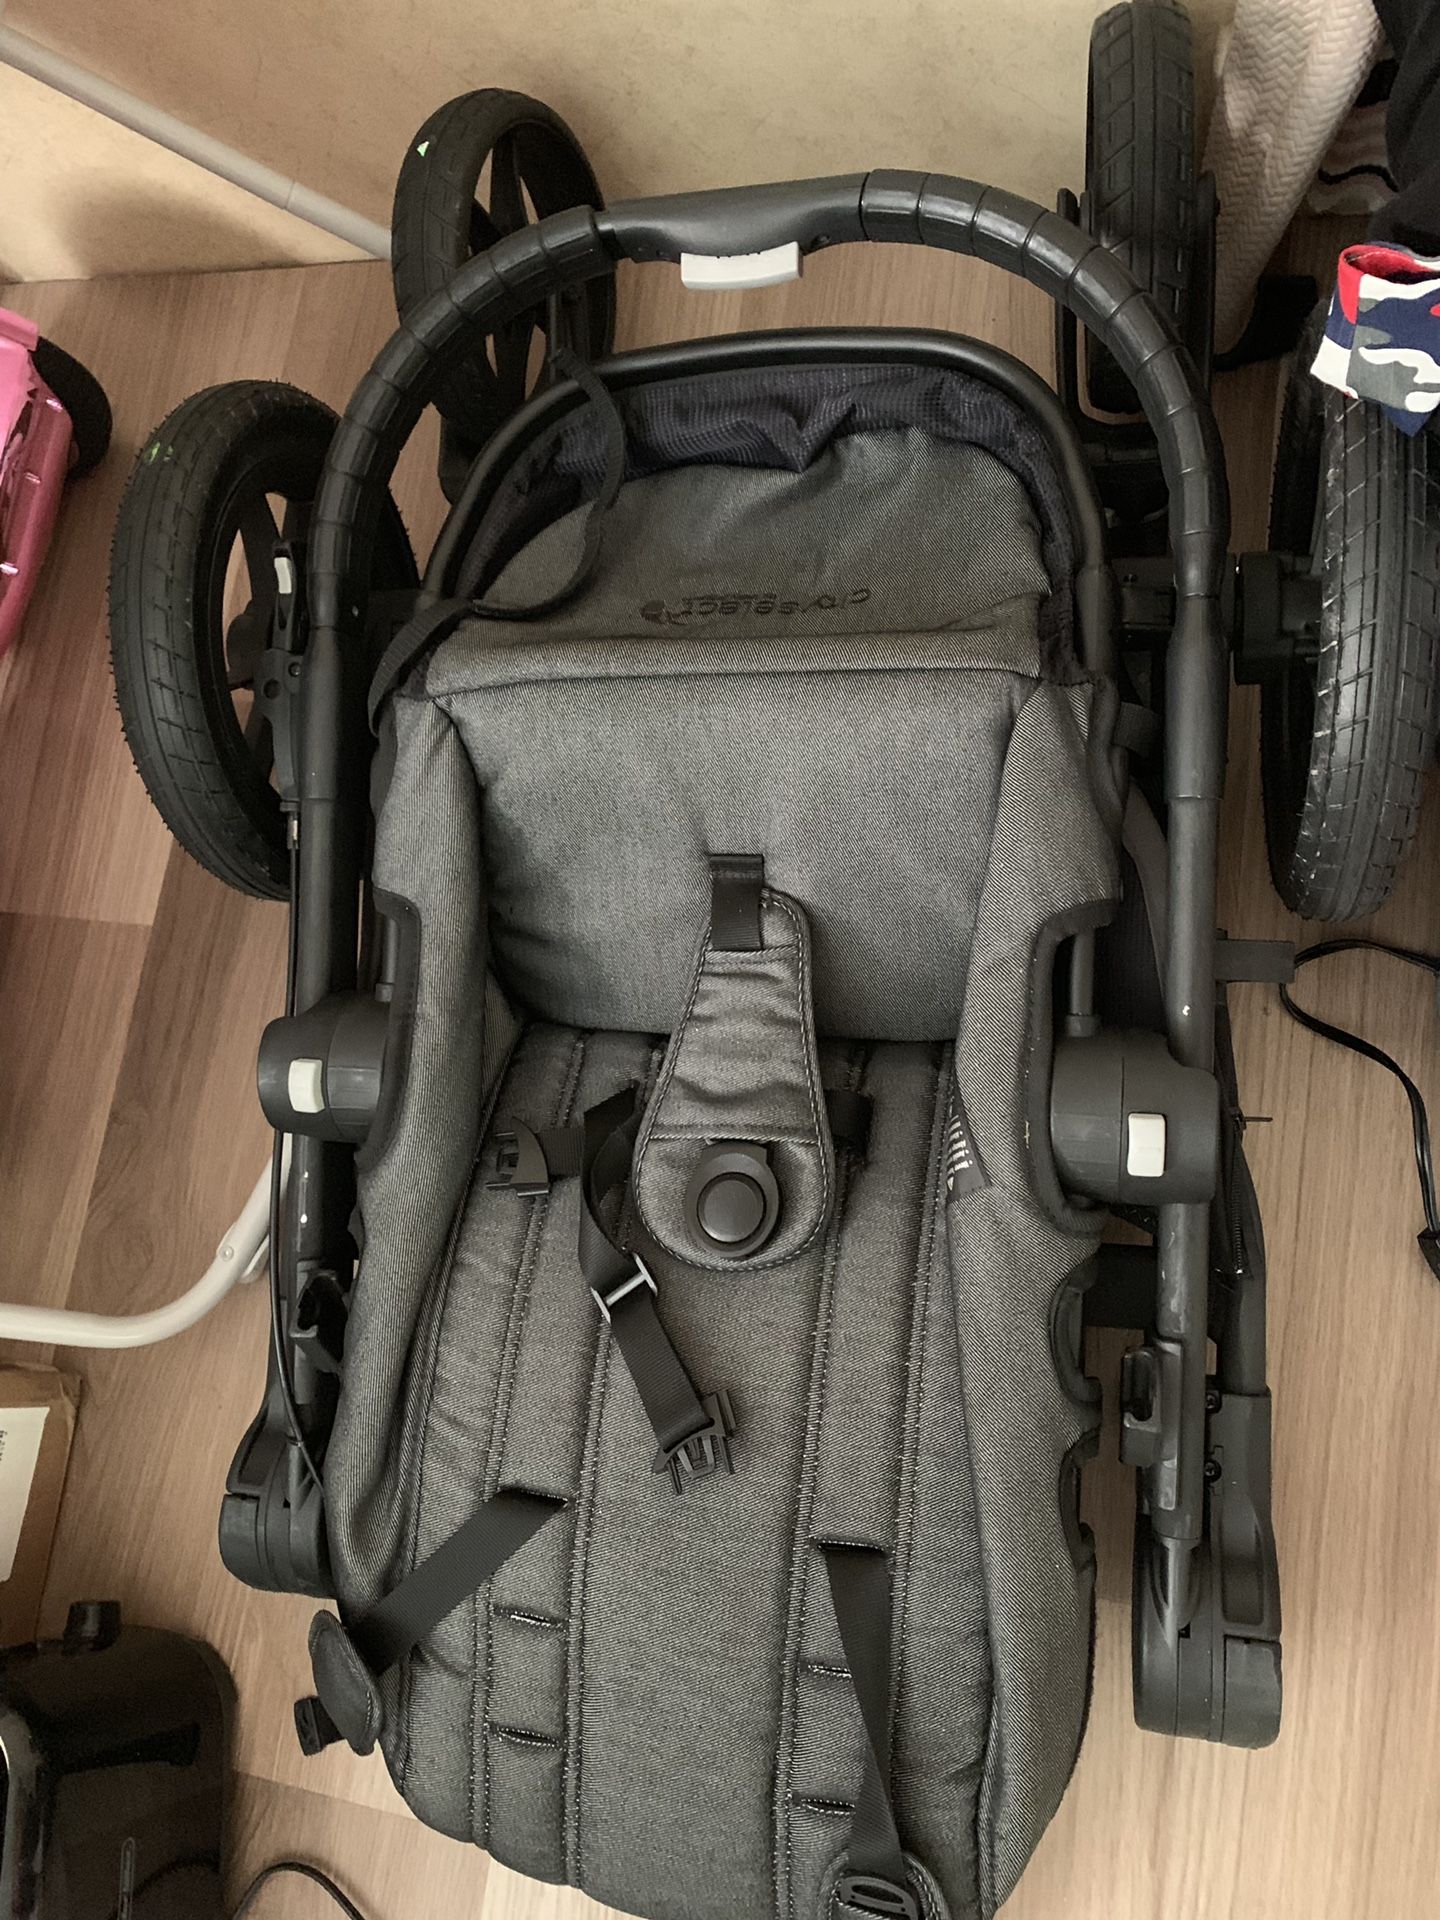 City select car seat and stroller.